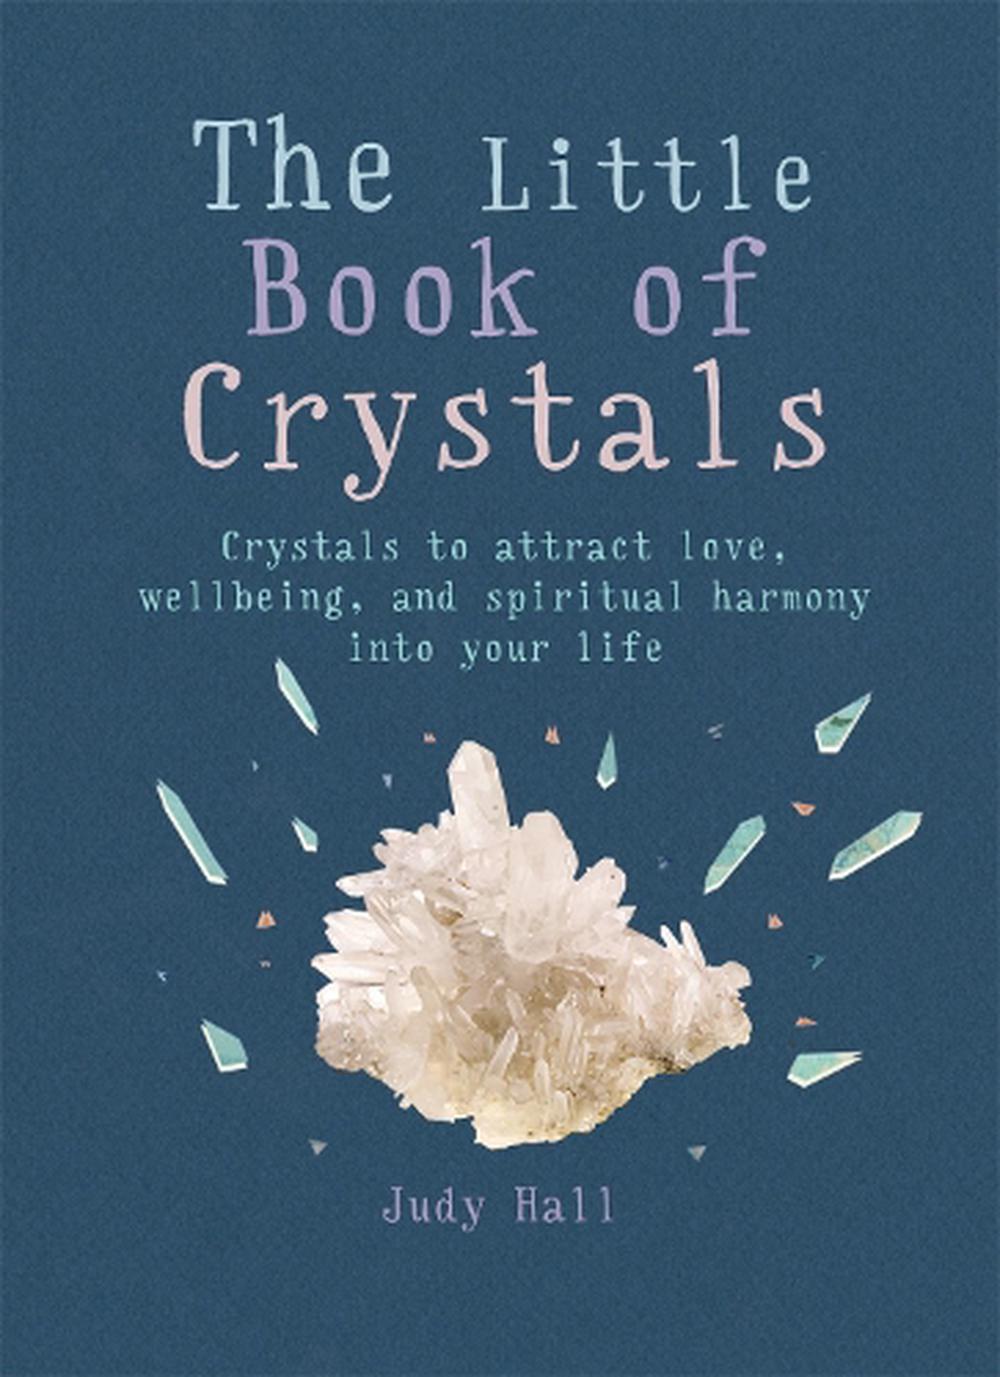 Little Book of Crystals, The - Judy Hall